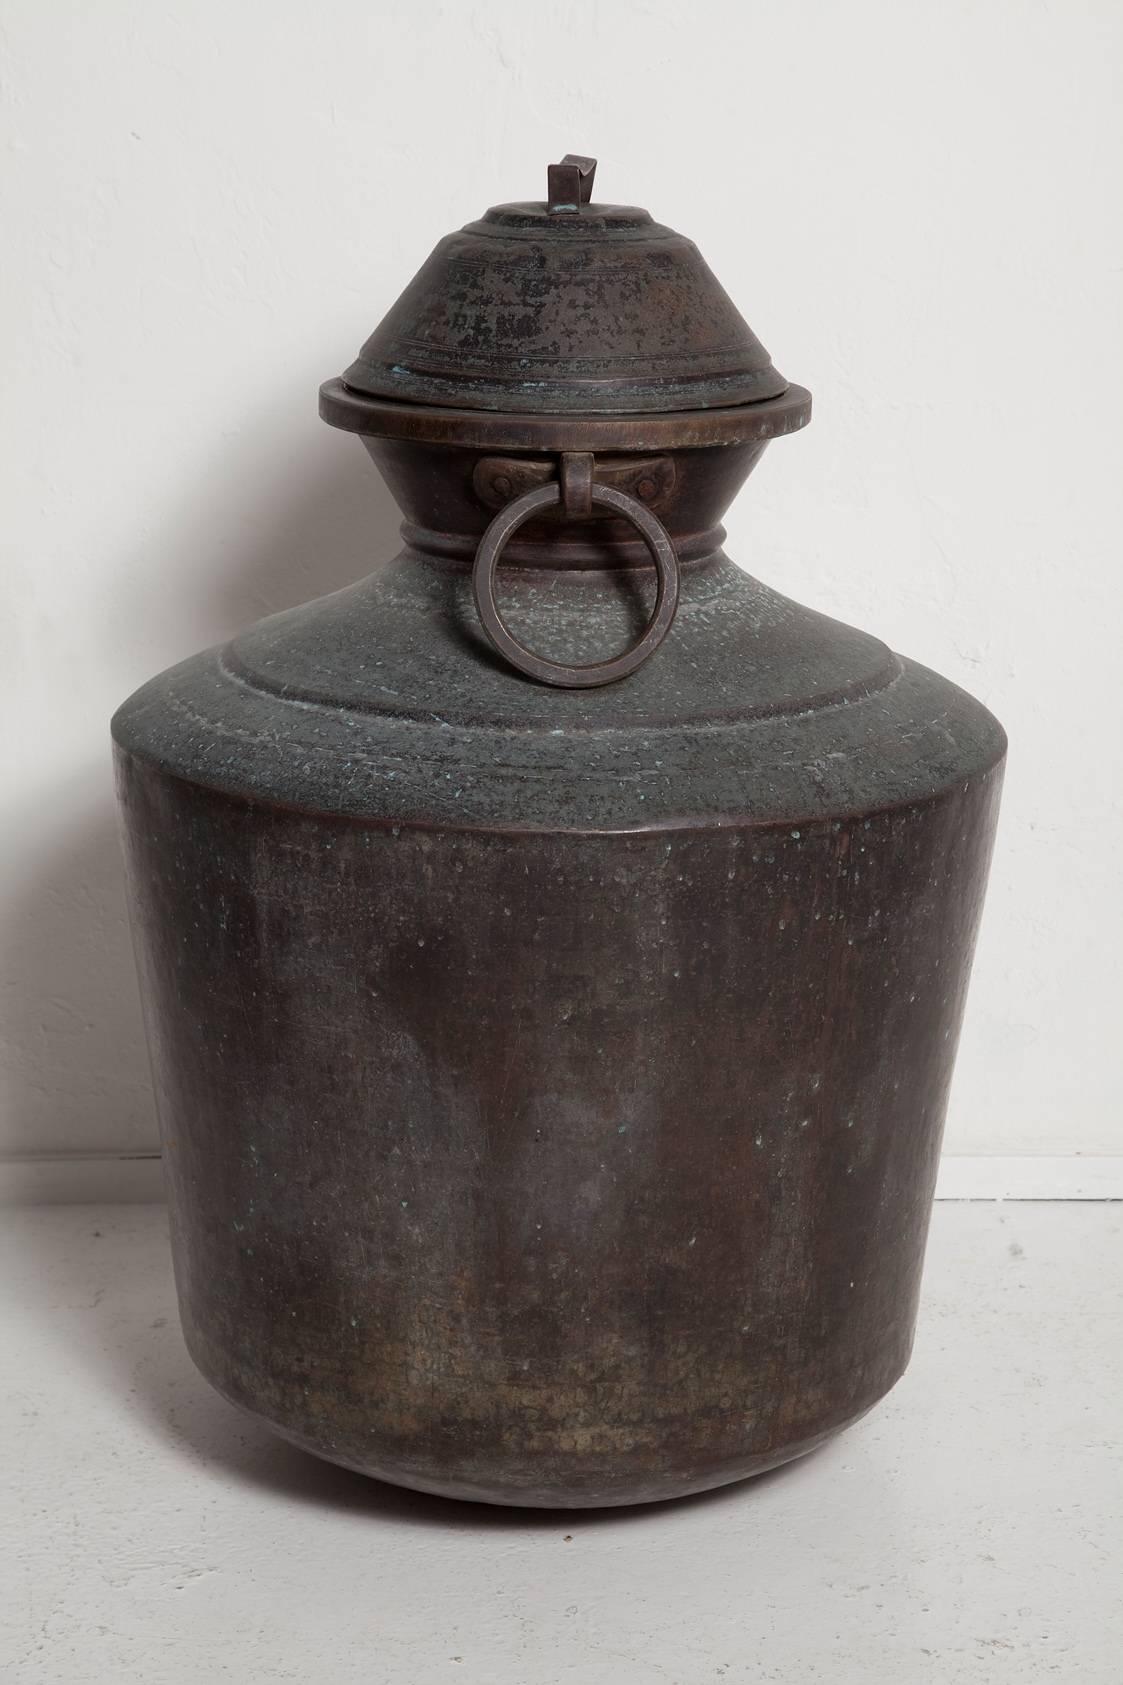 Giant Anglo-Indian style bronze lidded urn with two cast bronze handles, late 19th to mid-20th century, with gorgeous patina.